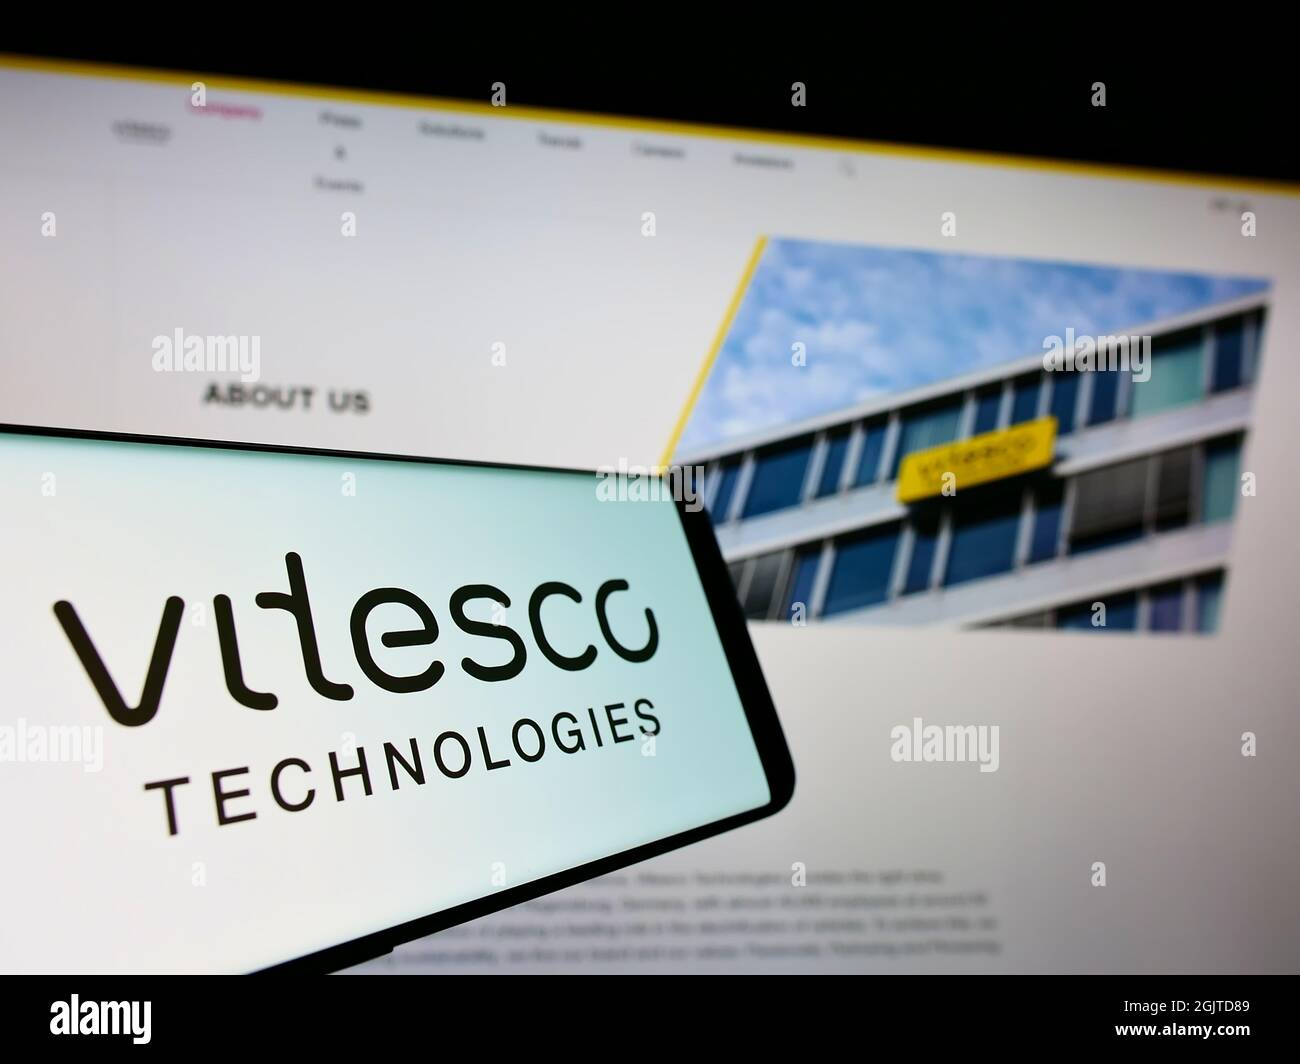 Cellphone with logo of German automotive supplier Vitesco Technologies on screen in front of business website. Focus on center of phone display. Stock Photo